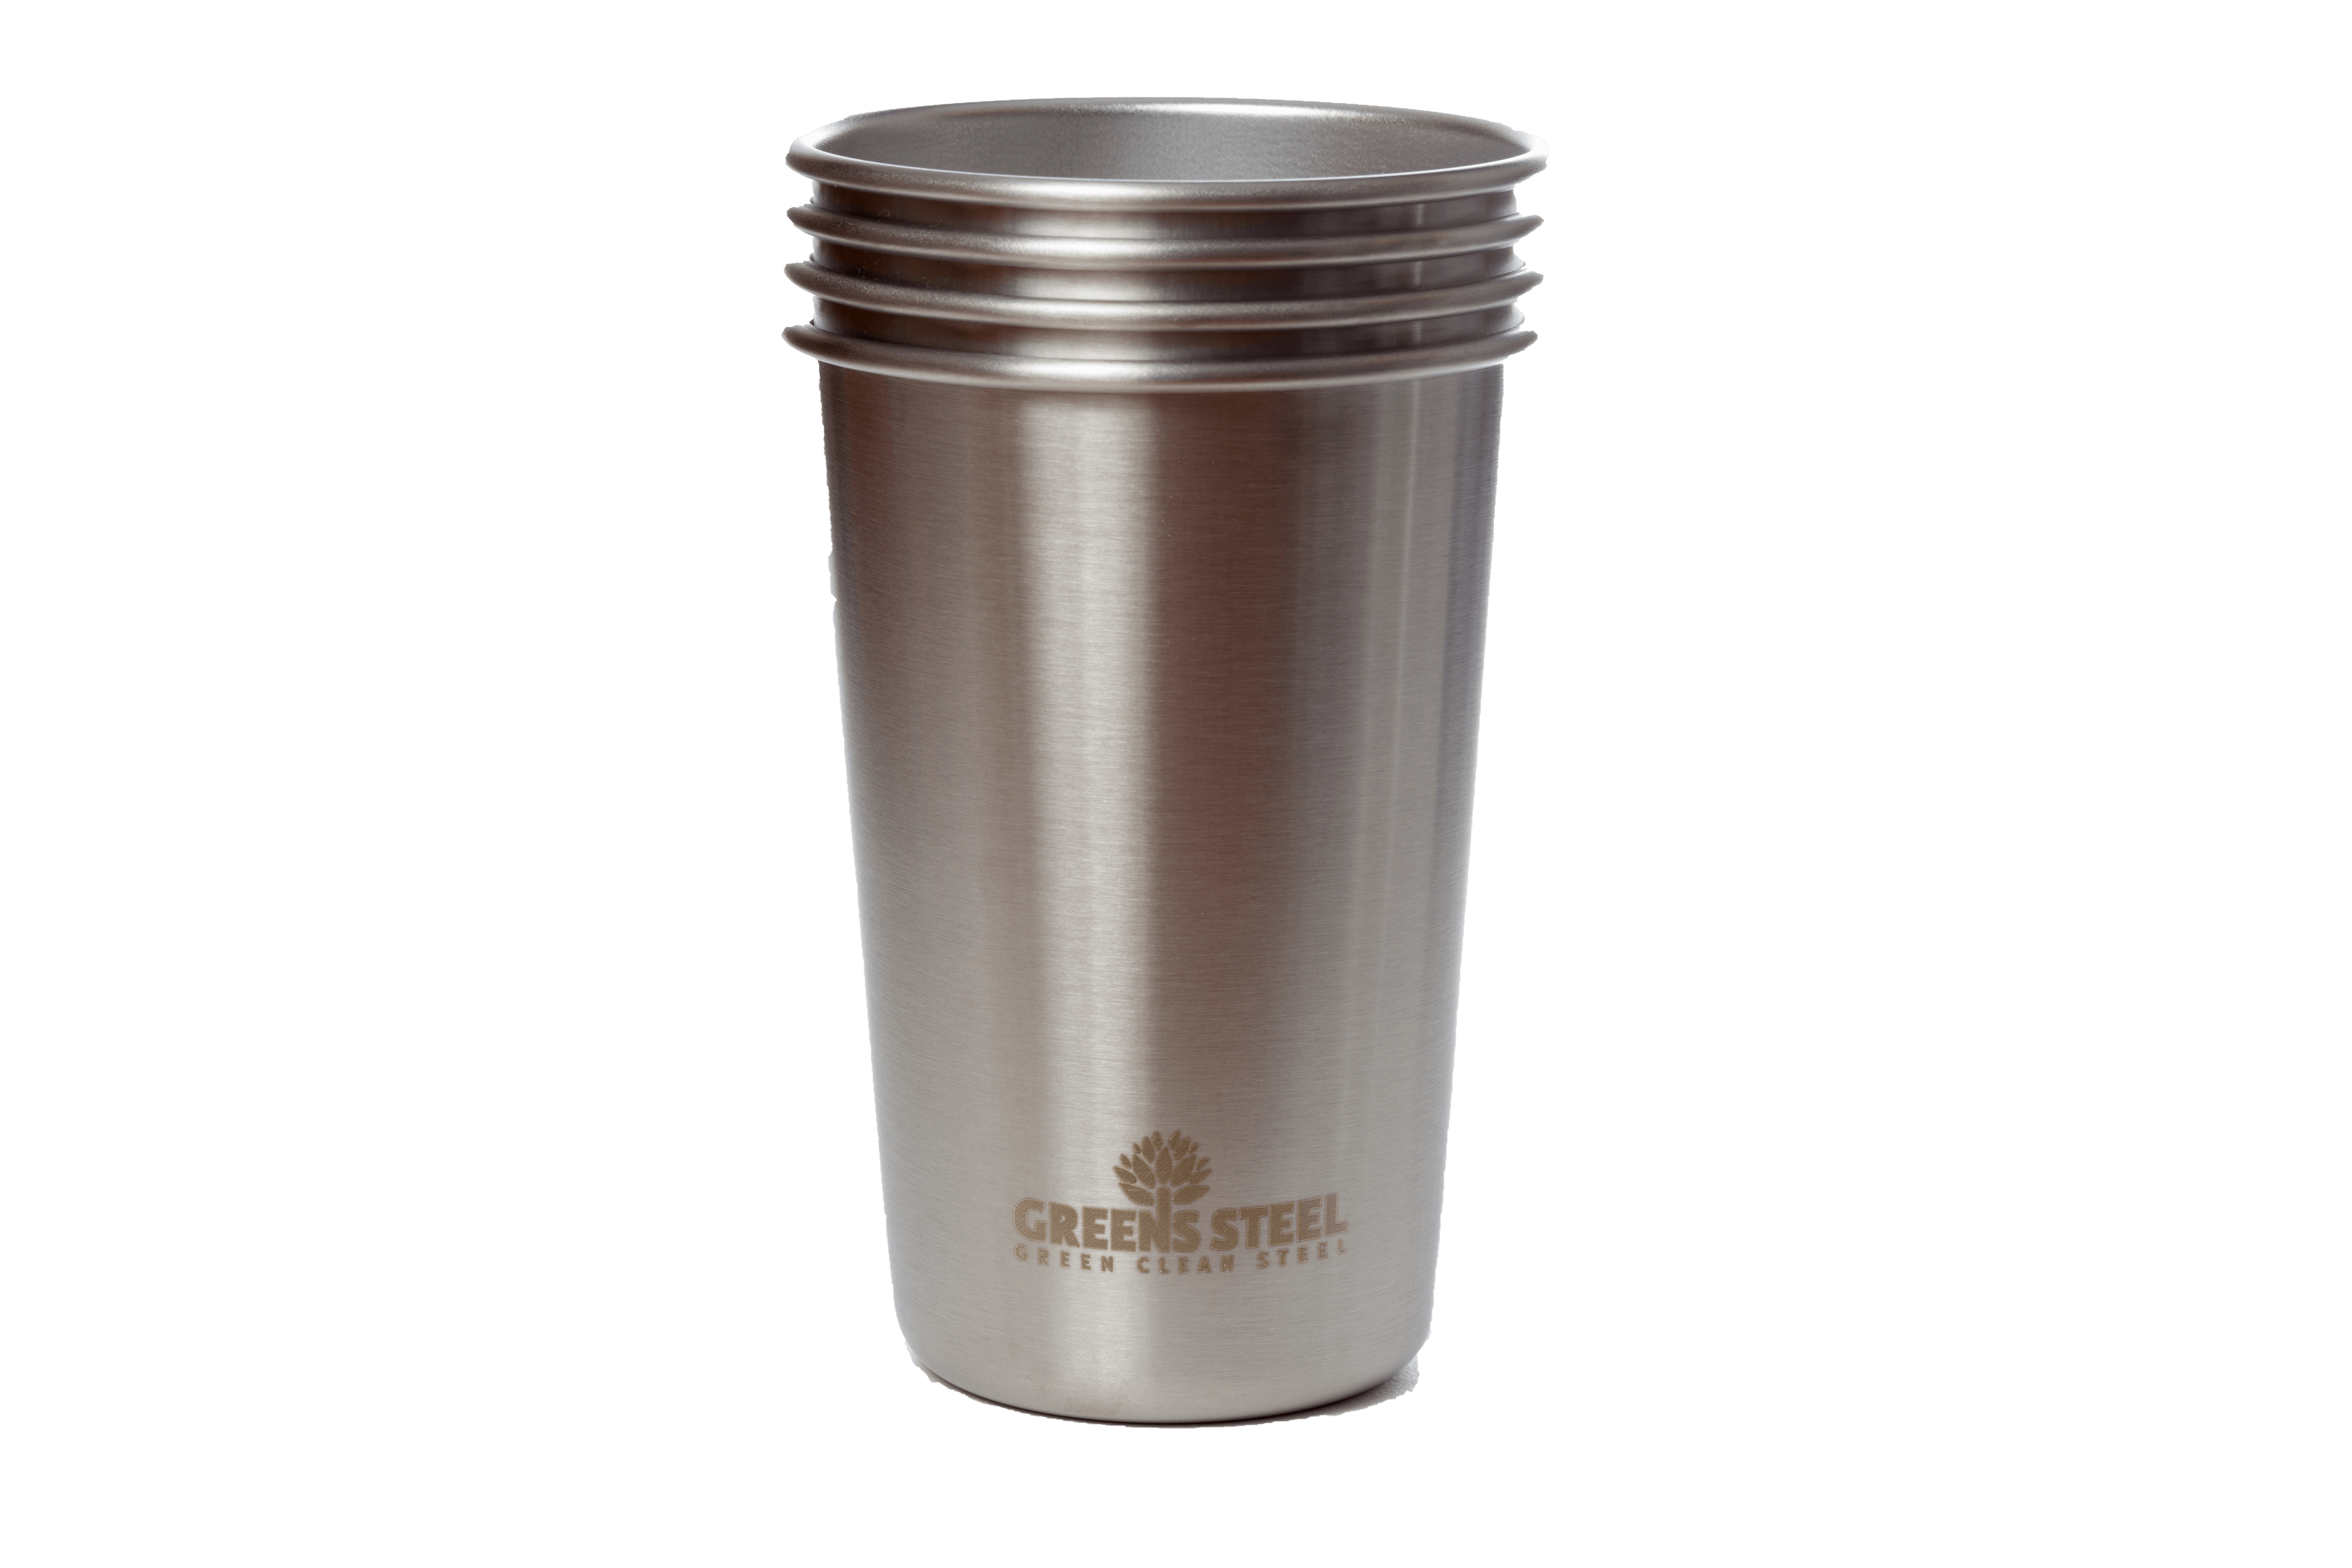 Stainless Steel Cup - Large 20 oz Imperial Pint Tumbler (2 Pack) - Premium  Metal Drinking Glasses